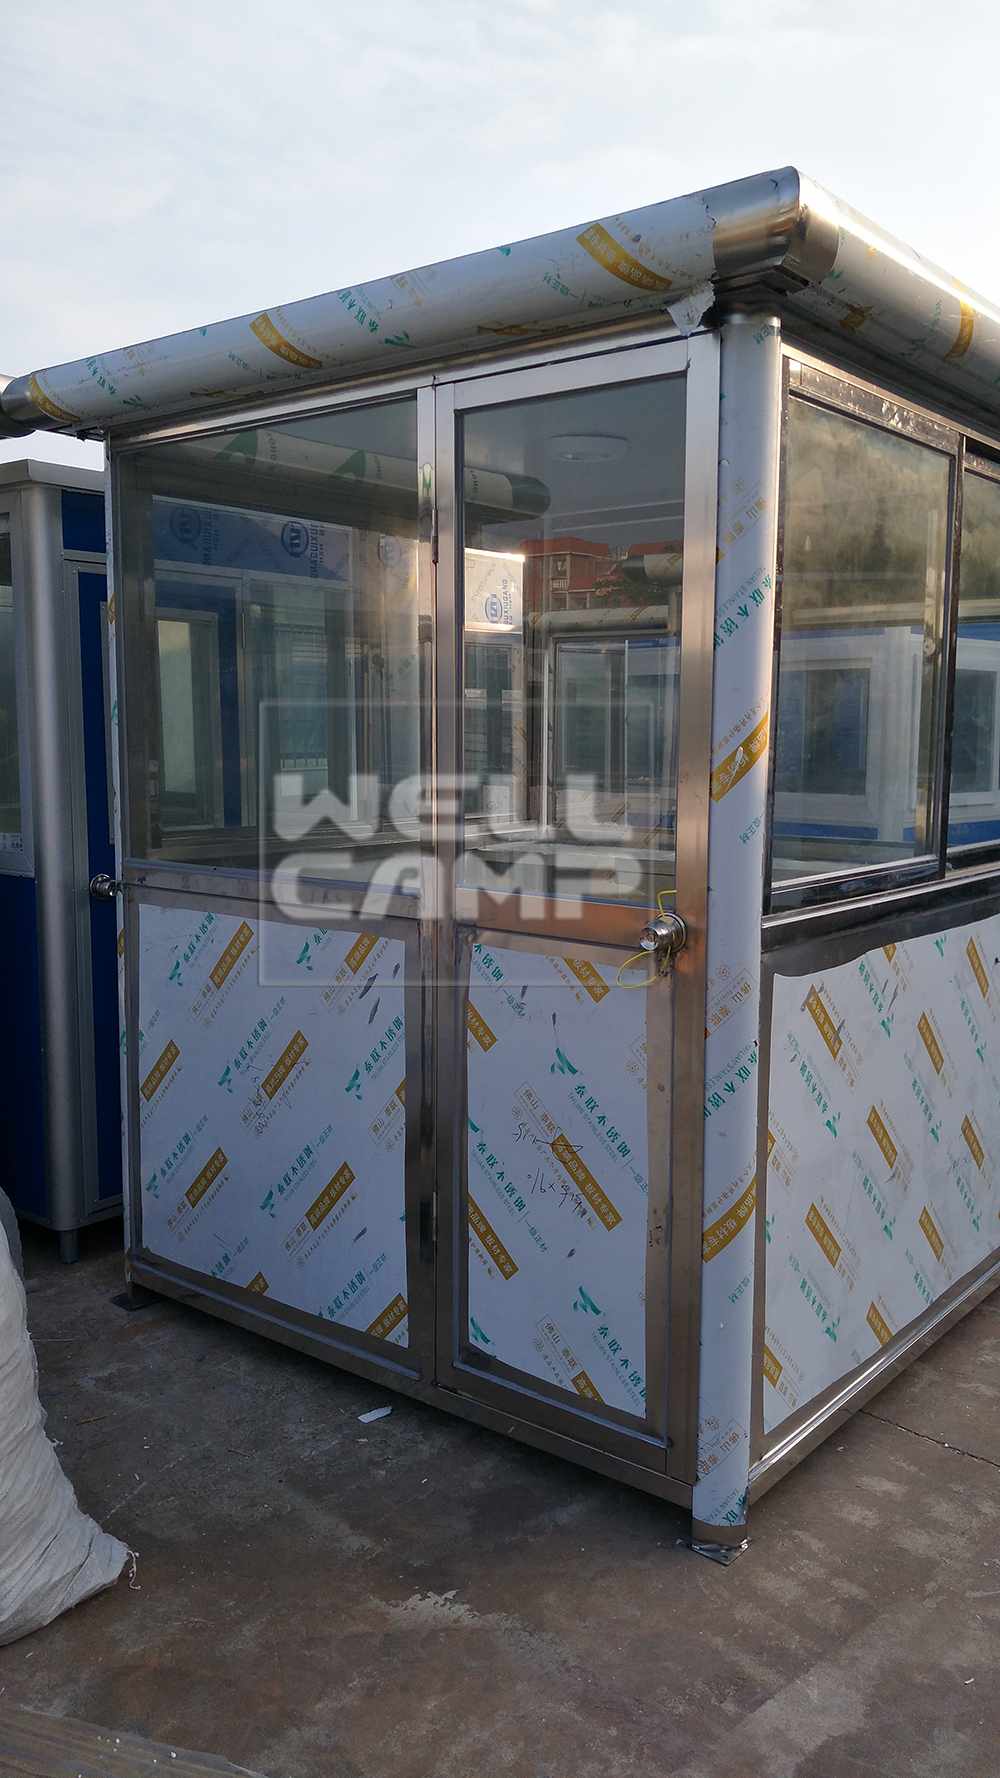 news-How long it will take for ODM processing-WELLCAMP, WELLCAMP prefab house, WELLCAMP container ho